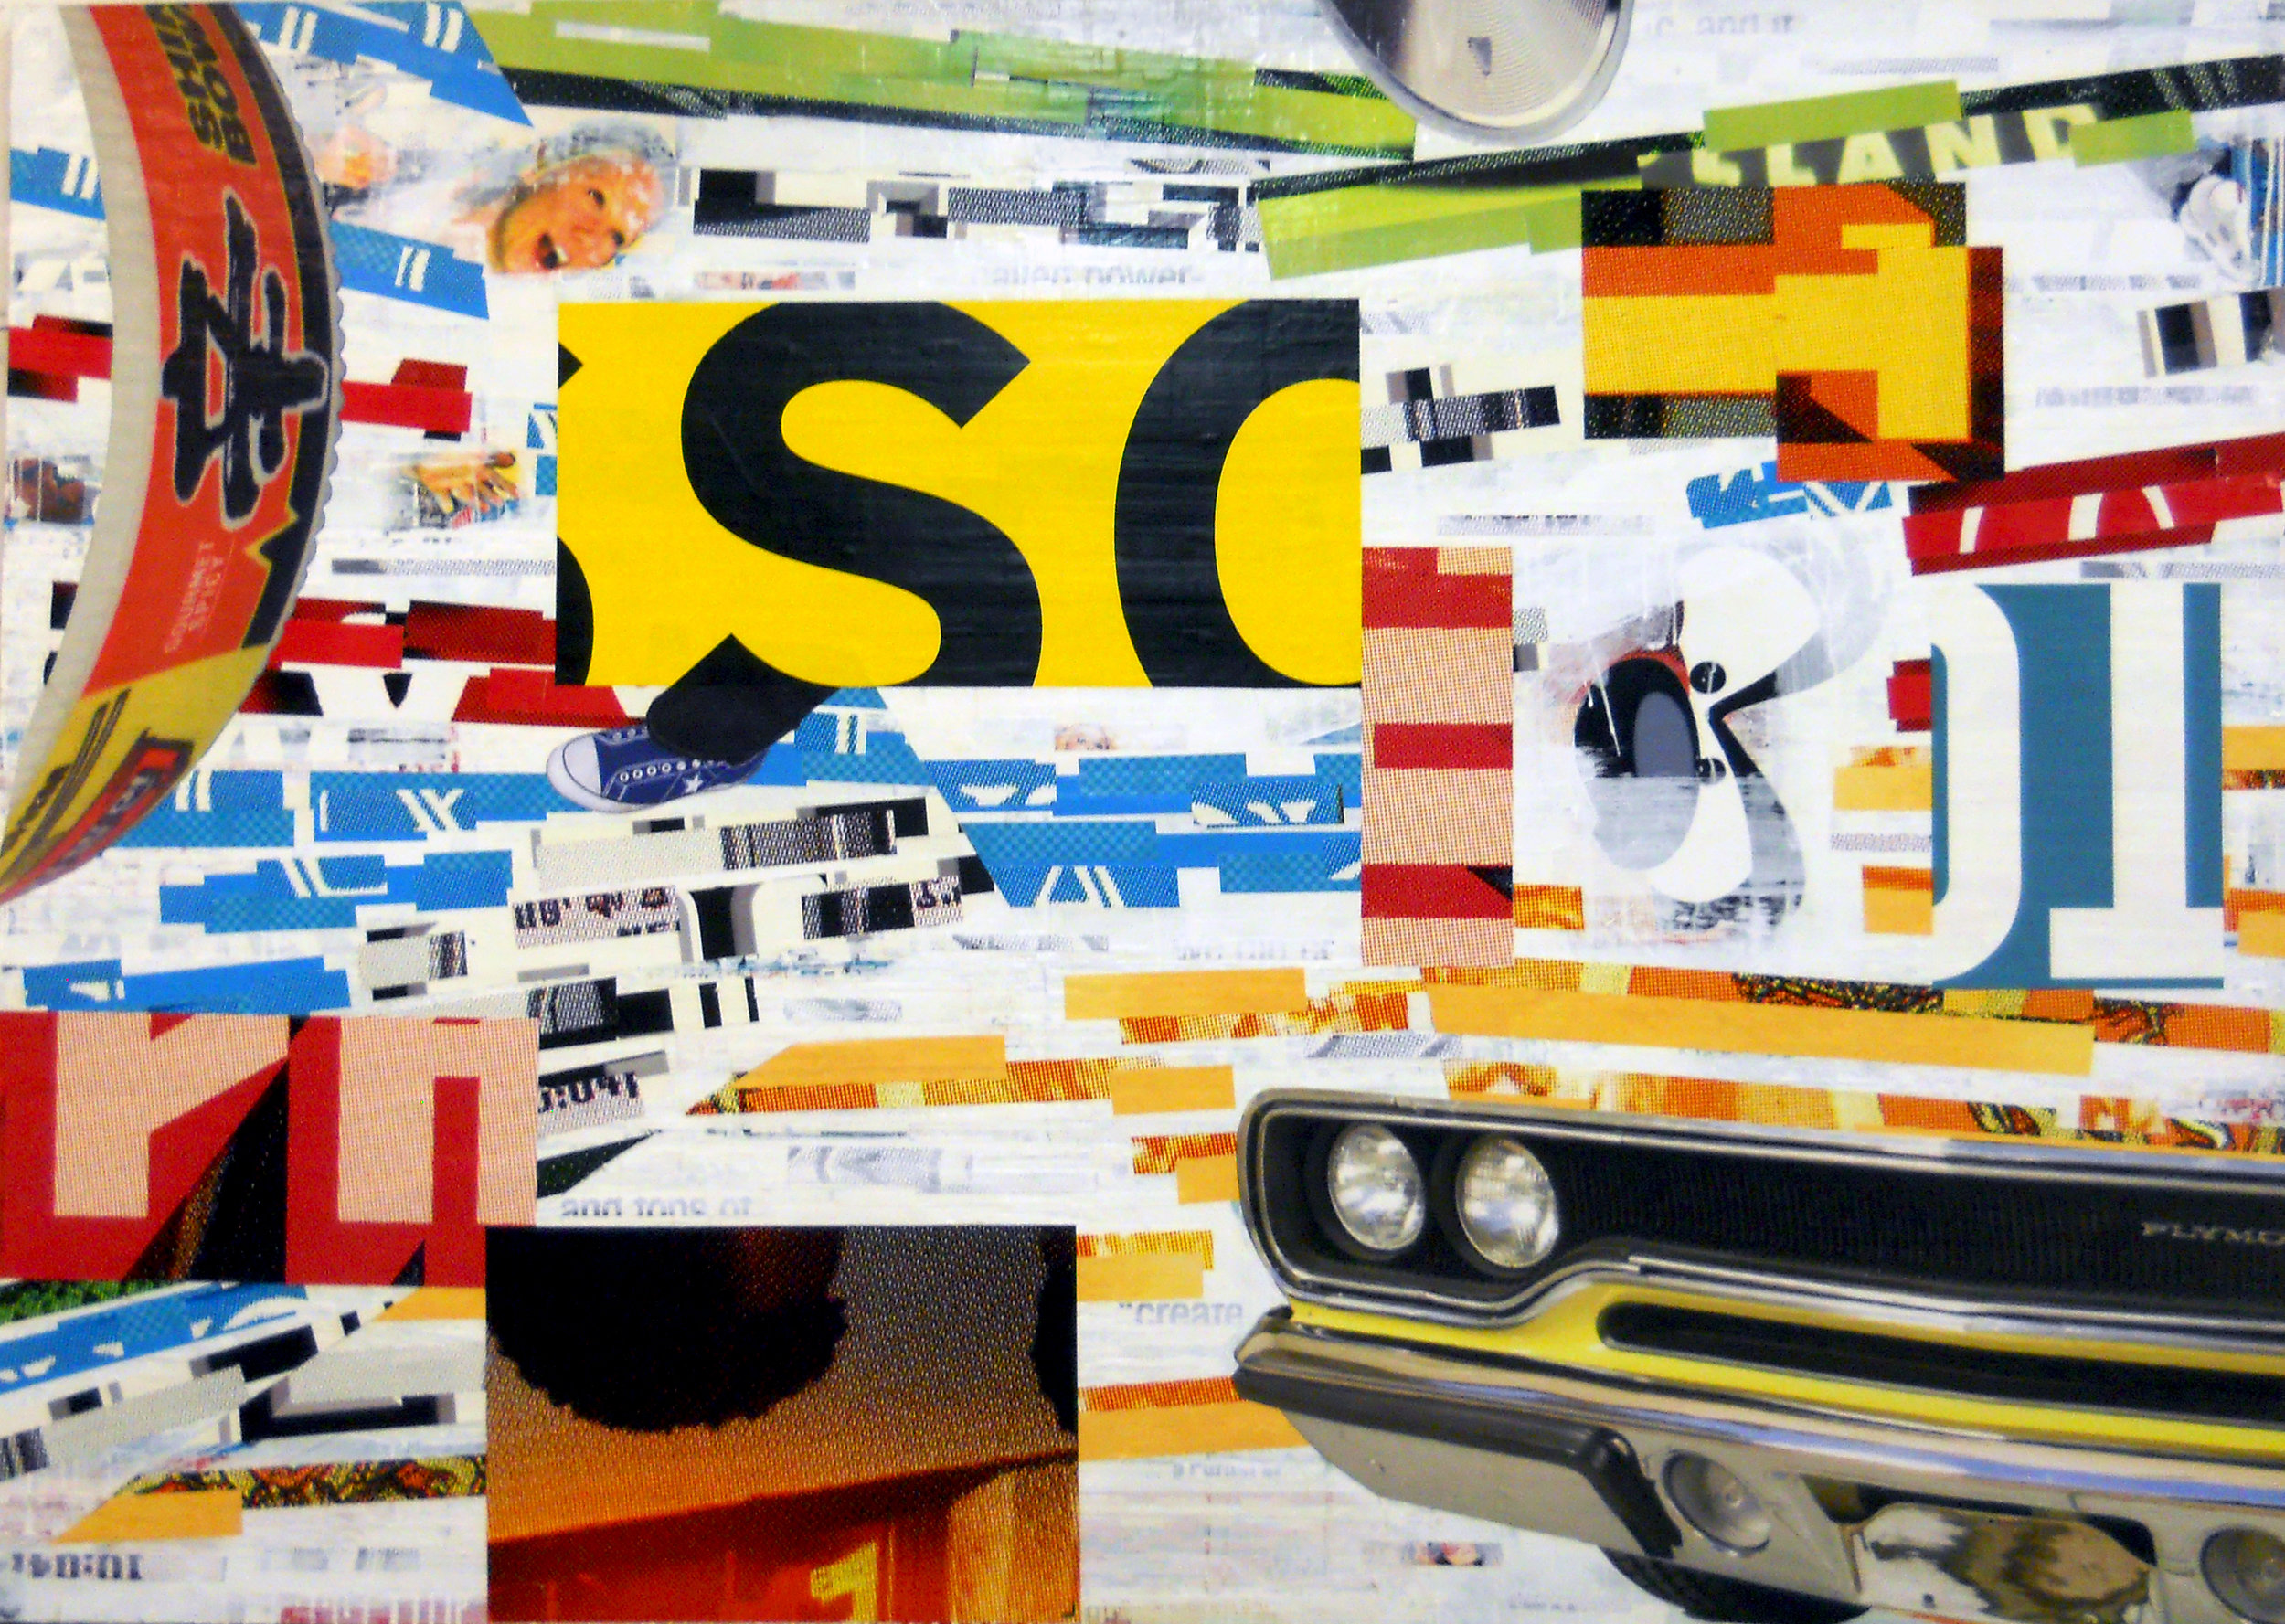  Acme School of Driving, 2014, 60h x 84w, Billboard paper and paint on panel  